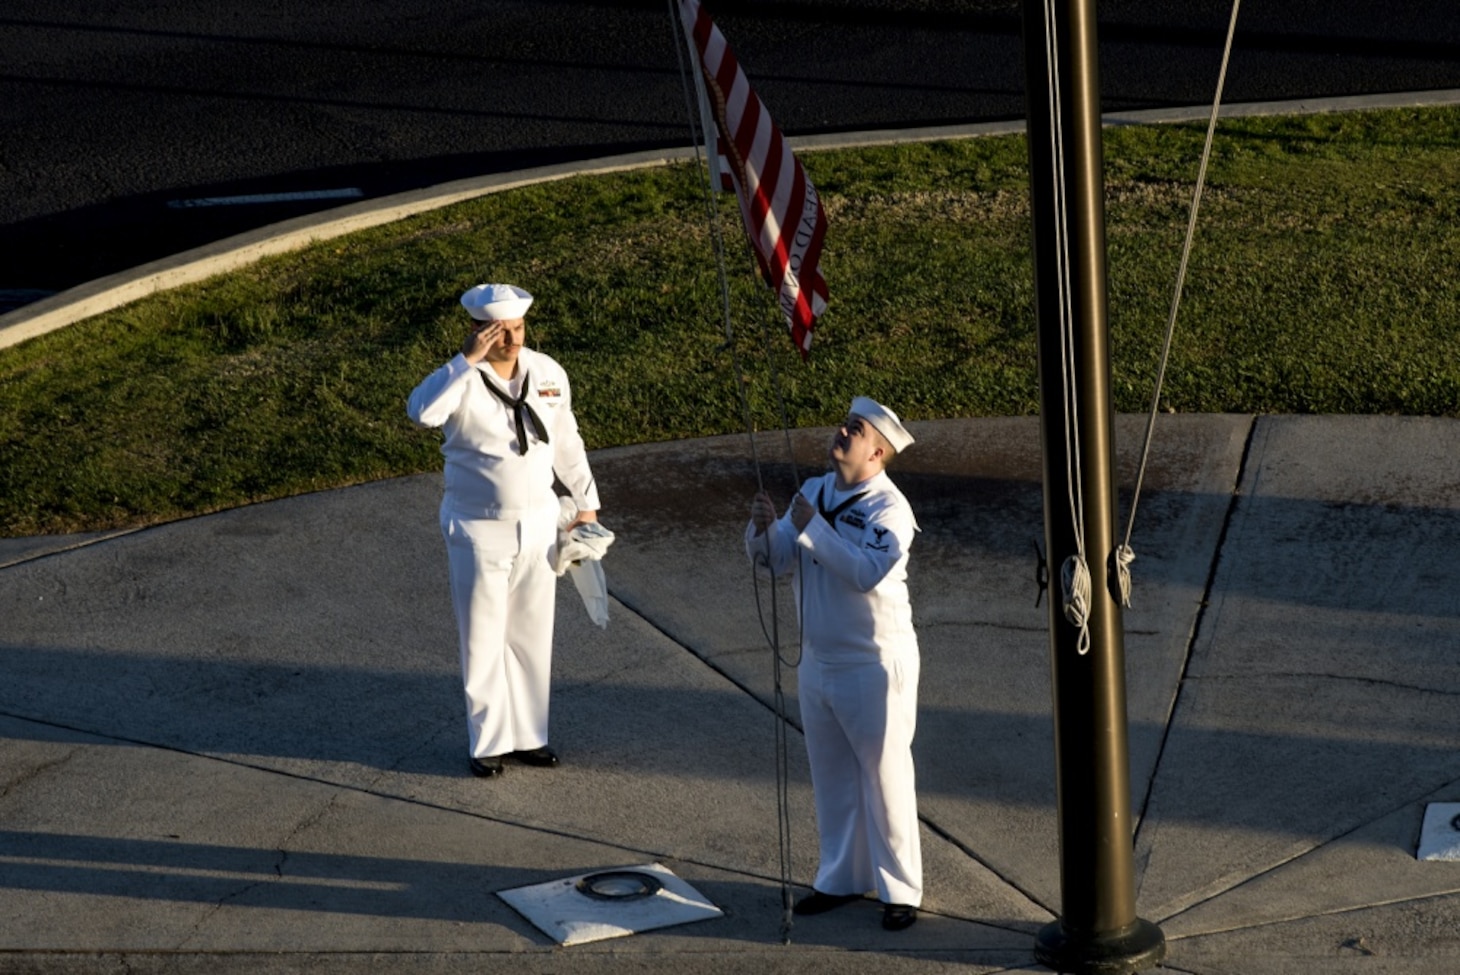 Culinary Specialist 2nd Class Gerado Taddei and Yeoman 2nd Class Andrew Thompson fly the "First Navy Jack" to start the New Year on Joint Base Pearl Harbor-Hickam. Rear Adm. Brian Fort, commander, Navy Region Hawaii and Naval Surface Group Middle Pacific, directed the base headquarters building to fly the "First Navy Jack" throughout 2018 to honor the 17 shipmates we lost on USS Fitzgerald (DDG-62) and USS John S. McCain (DDG-56) and as a reminder that our warfighting edge is not only back but renewed and forged with purpose.